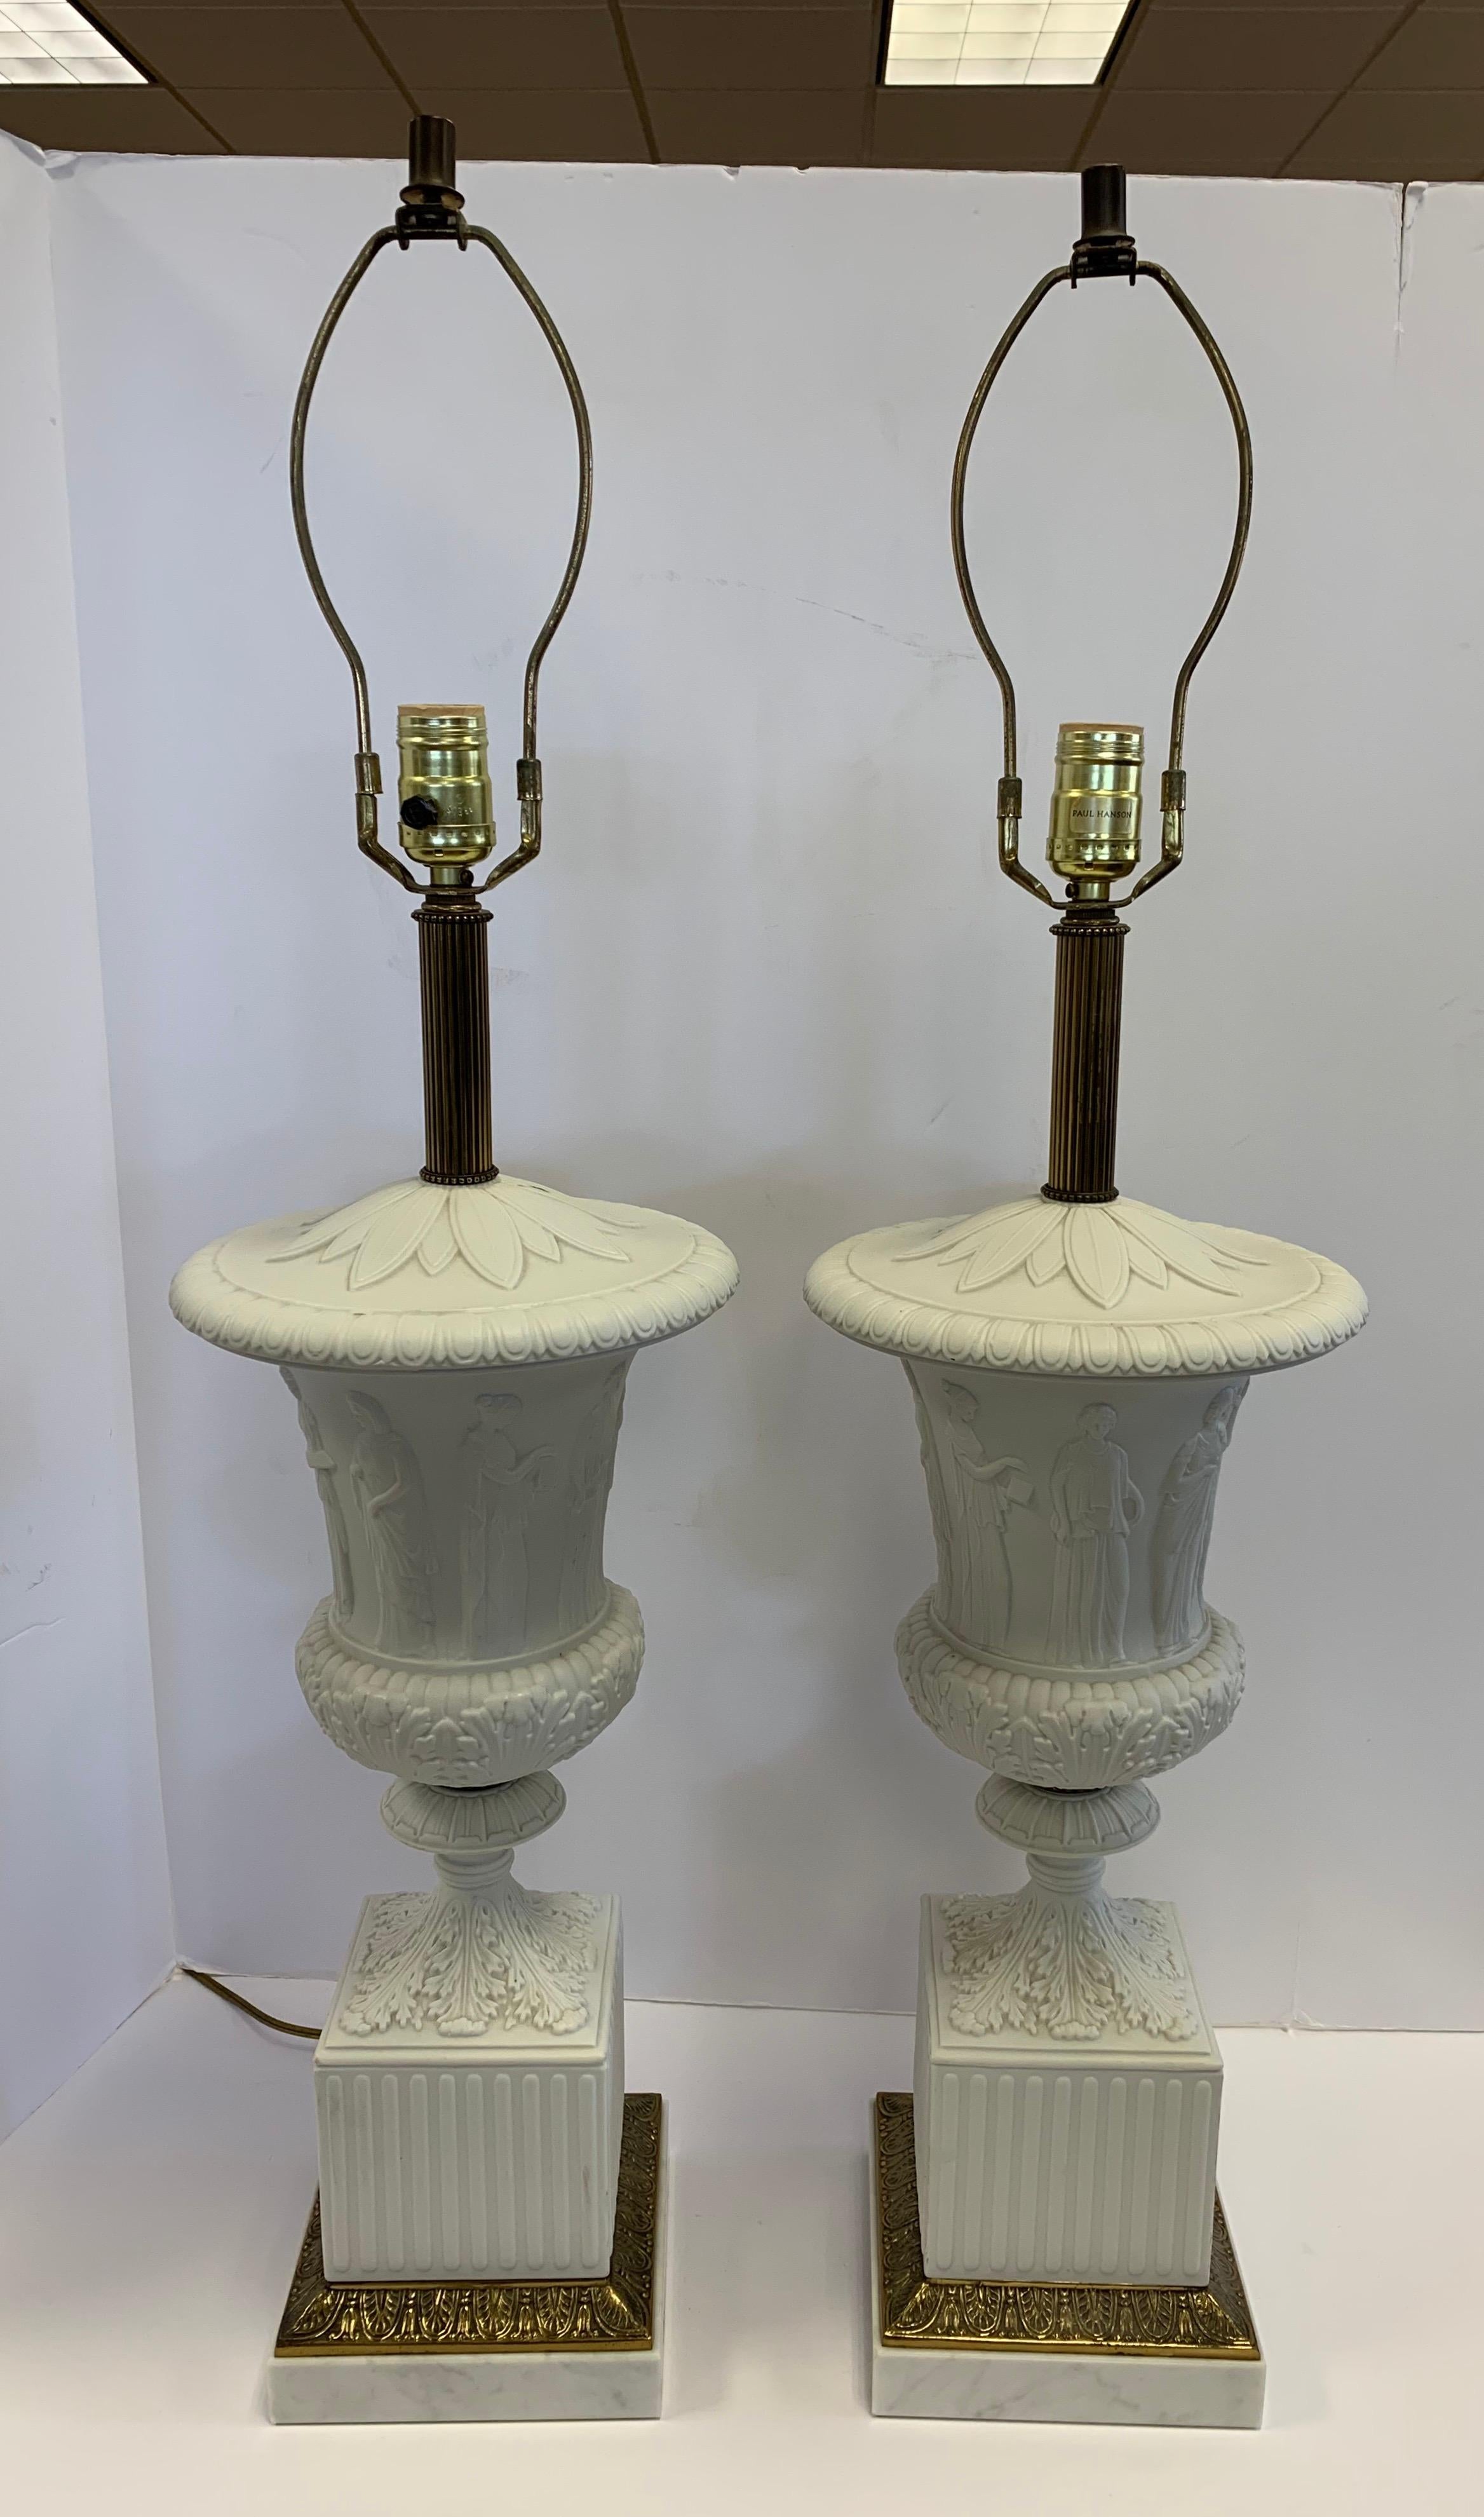 Stunning pair of neoclassical Paul Hanson white urn form porcelain table lamps with carrara  marble bases. Feature a raised design of classical female figures all and acanthus leaf detail all around. Luxurious color, scale and design. All hallmarks